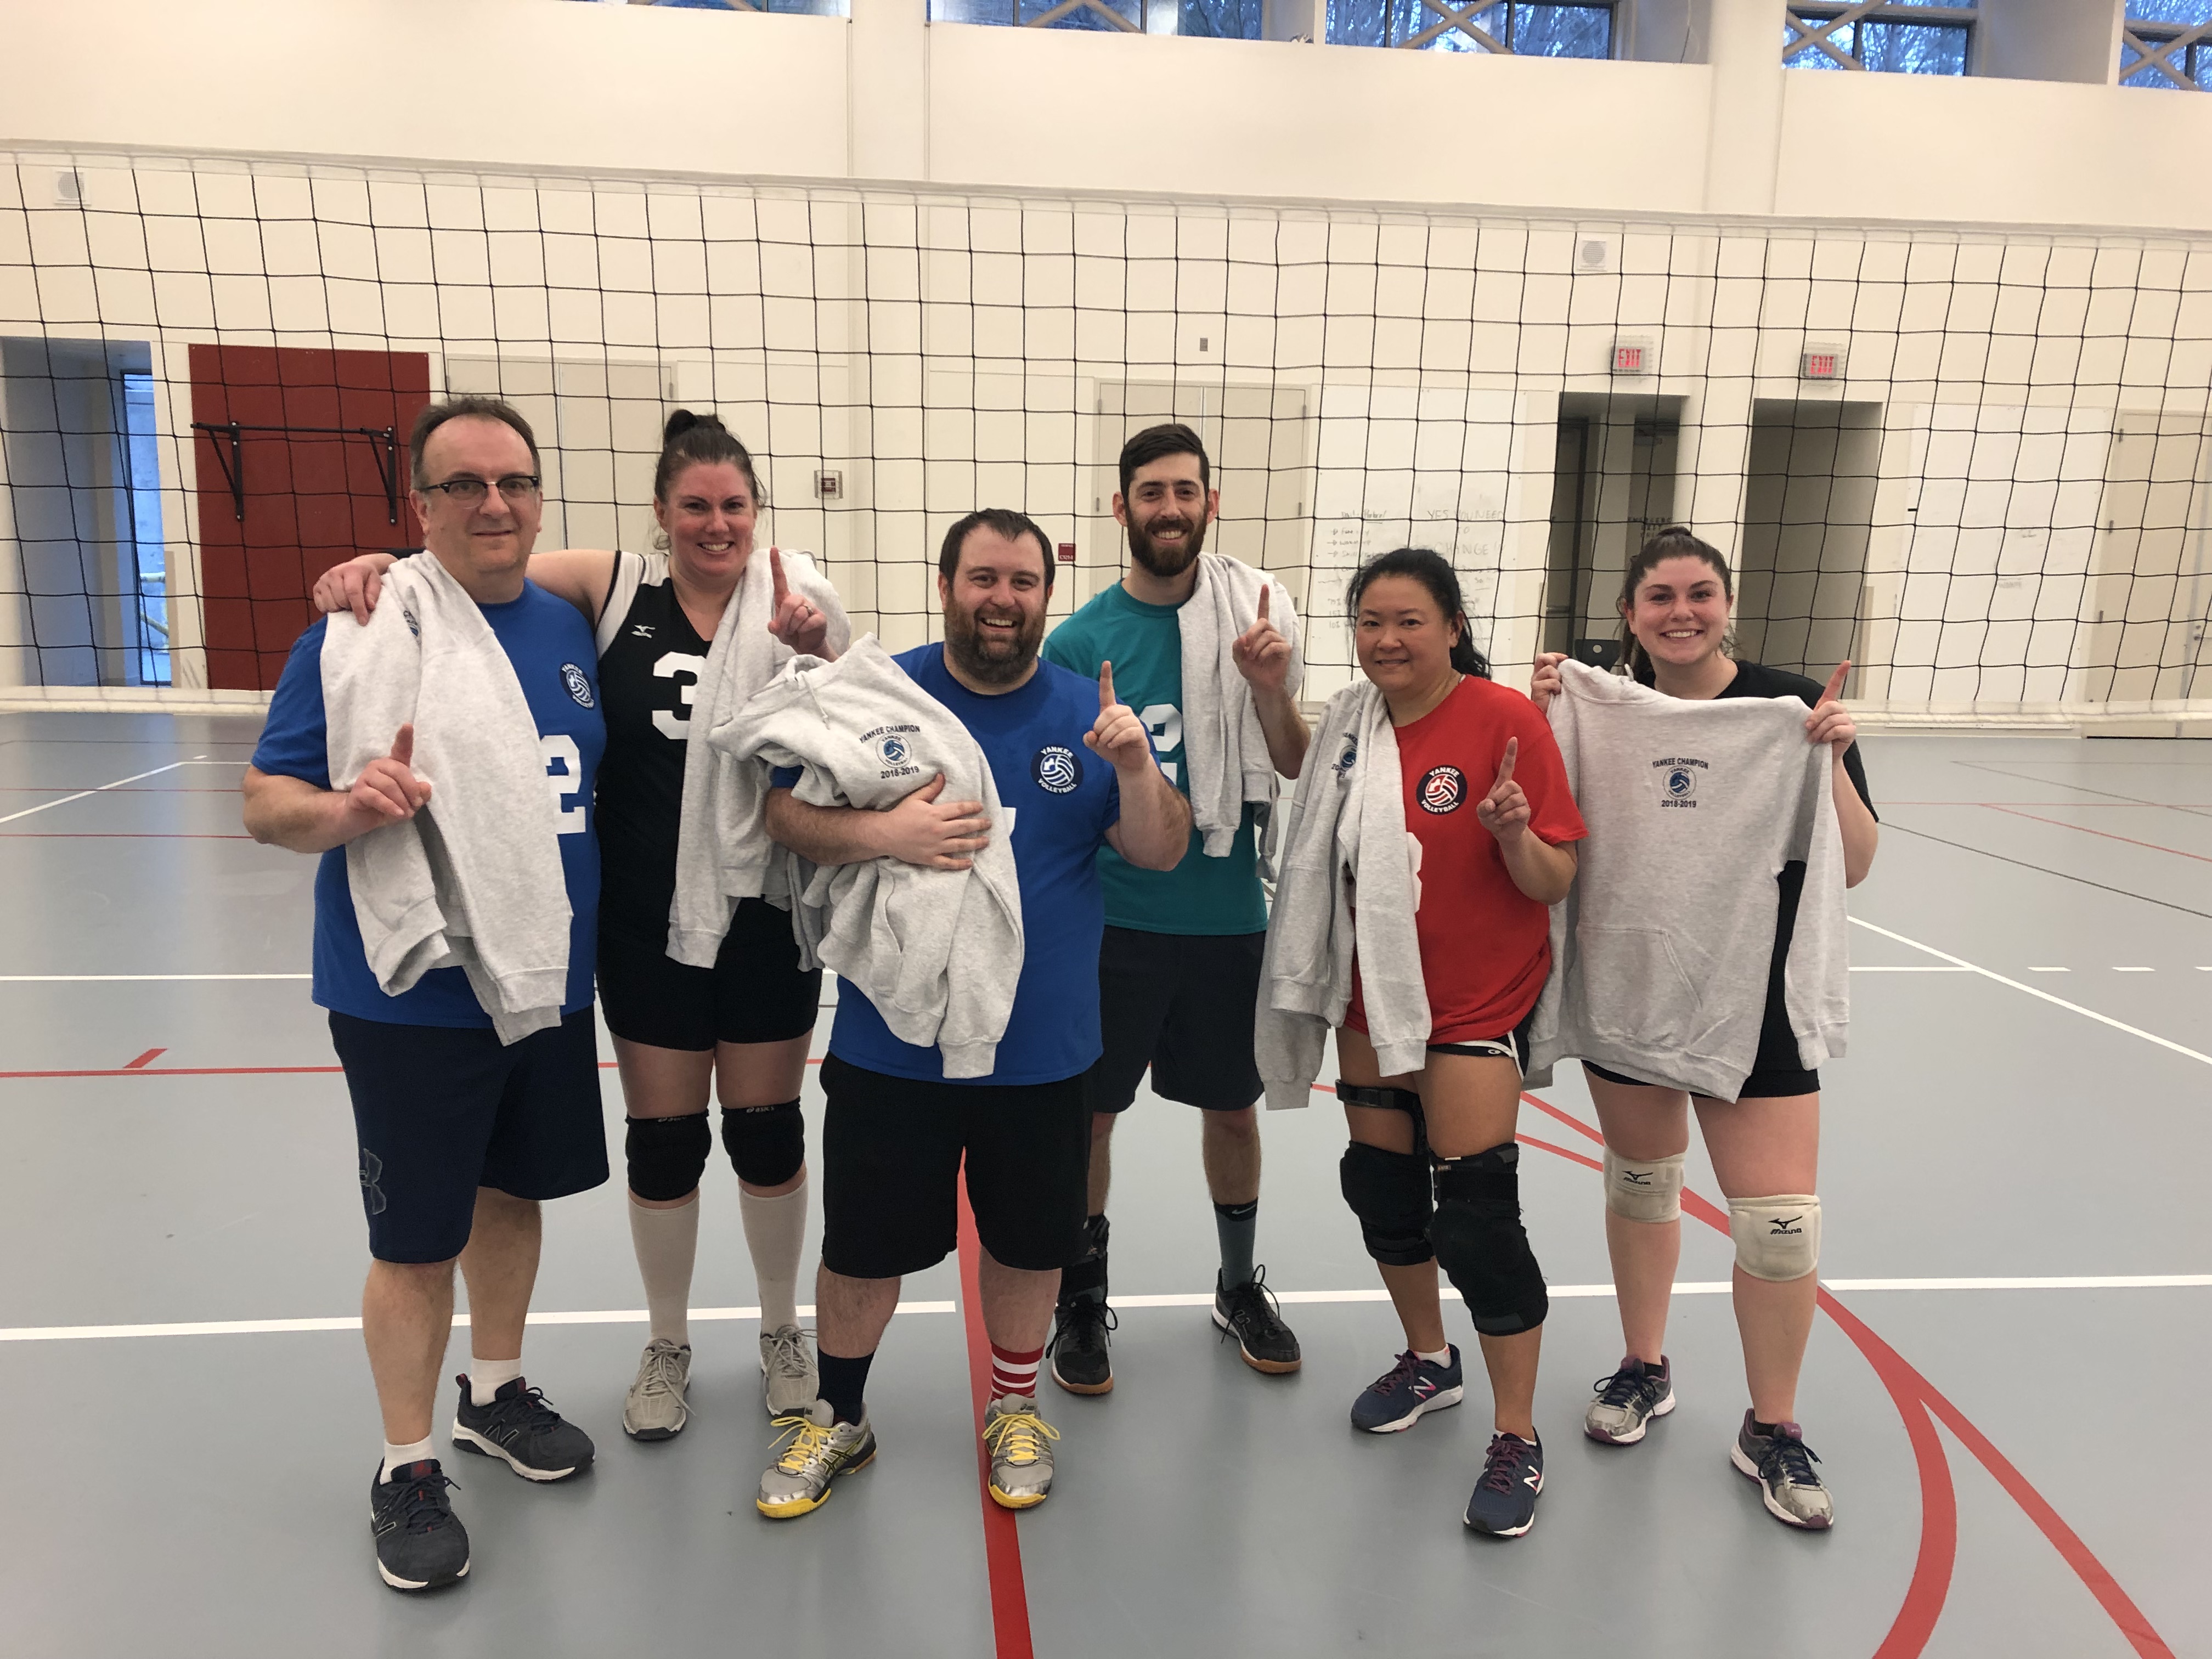 4/7/19 Westworld wins CRC scramble without winning a game on the men’s net